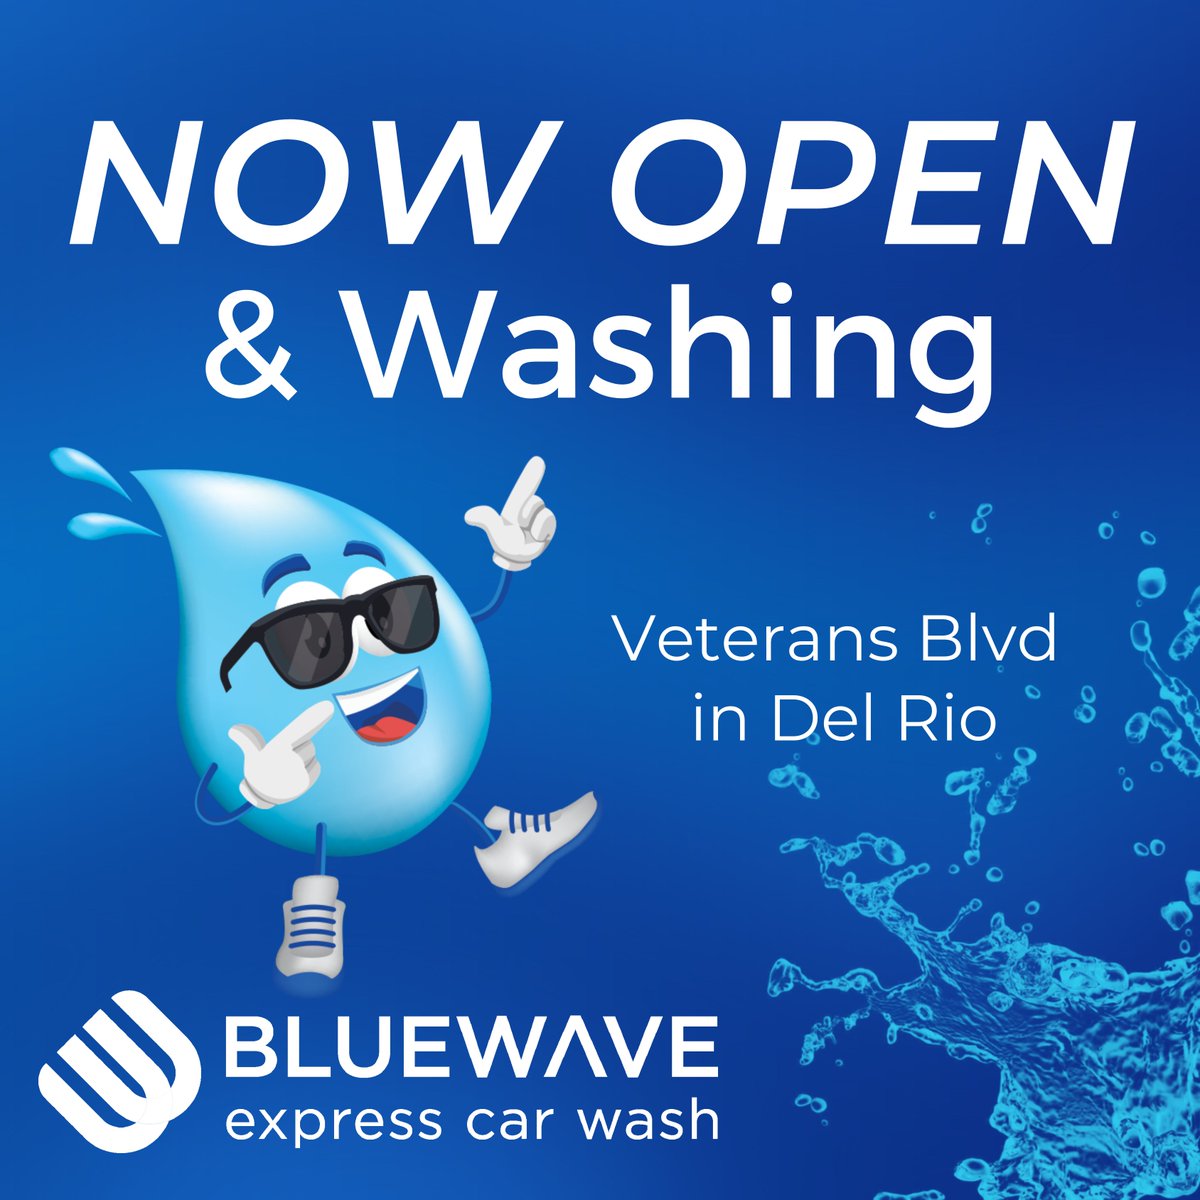 #NOWOPEN & WASHING CARS! COME CHECK OUT OUR #IMPROVEMENTS! 😃
An upgraded #BlueWaveExpress #experience: #music #nowplaying, #free windshield fluid #refill, FREE #microfibertowels, and more.
See you soon!
📌2201 Veterans Blvd, Del Rio, TX 78840
#carwash #delrio #bestcarwash